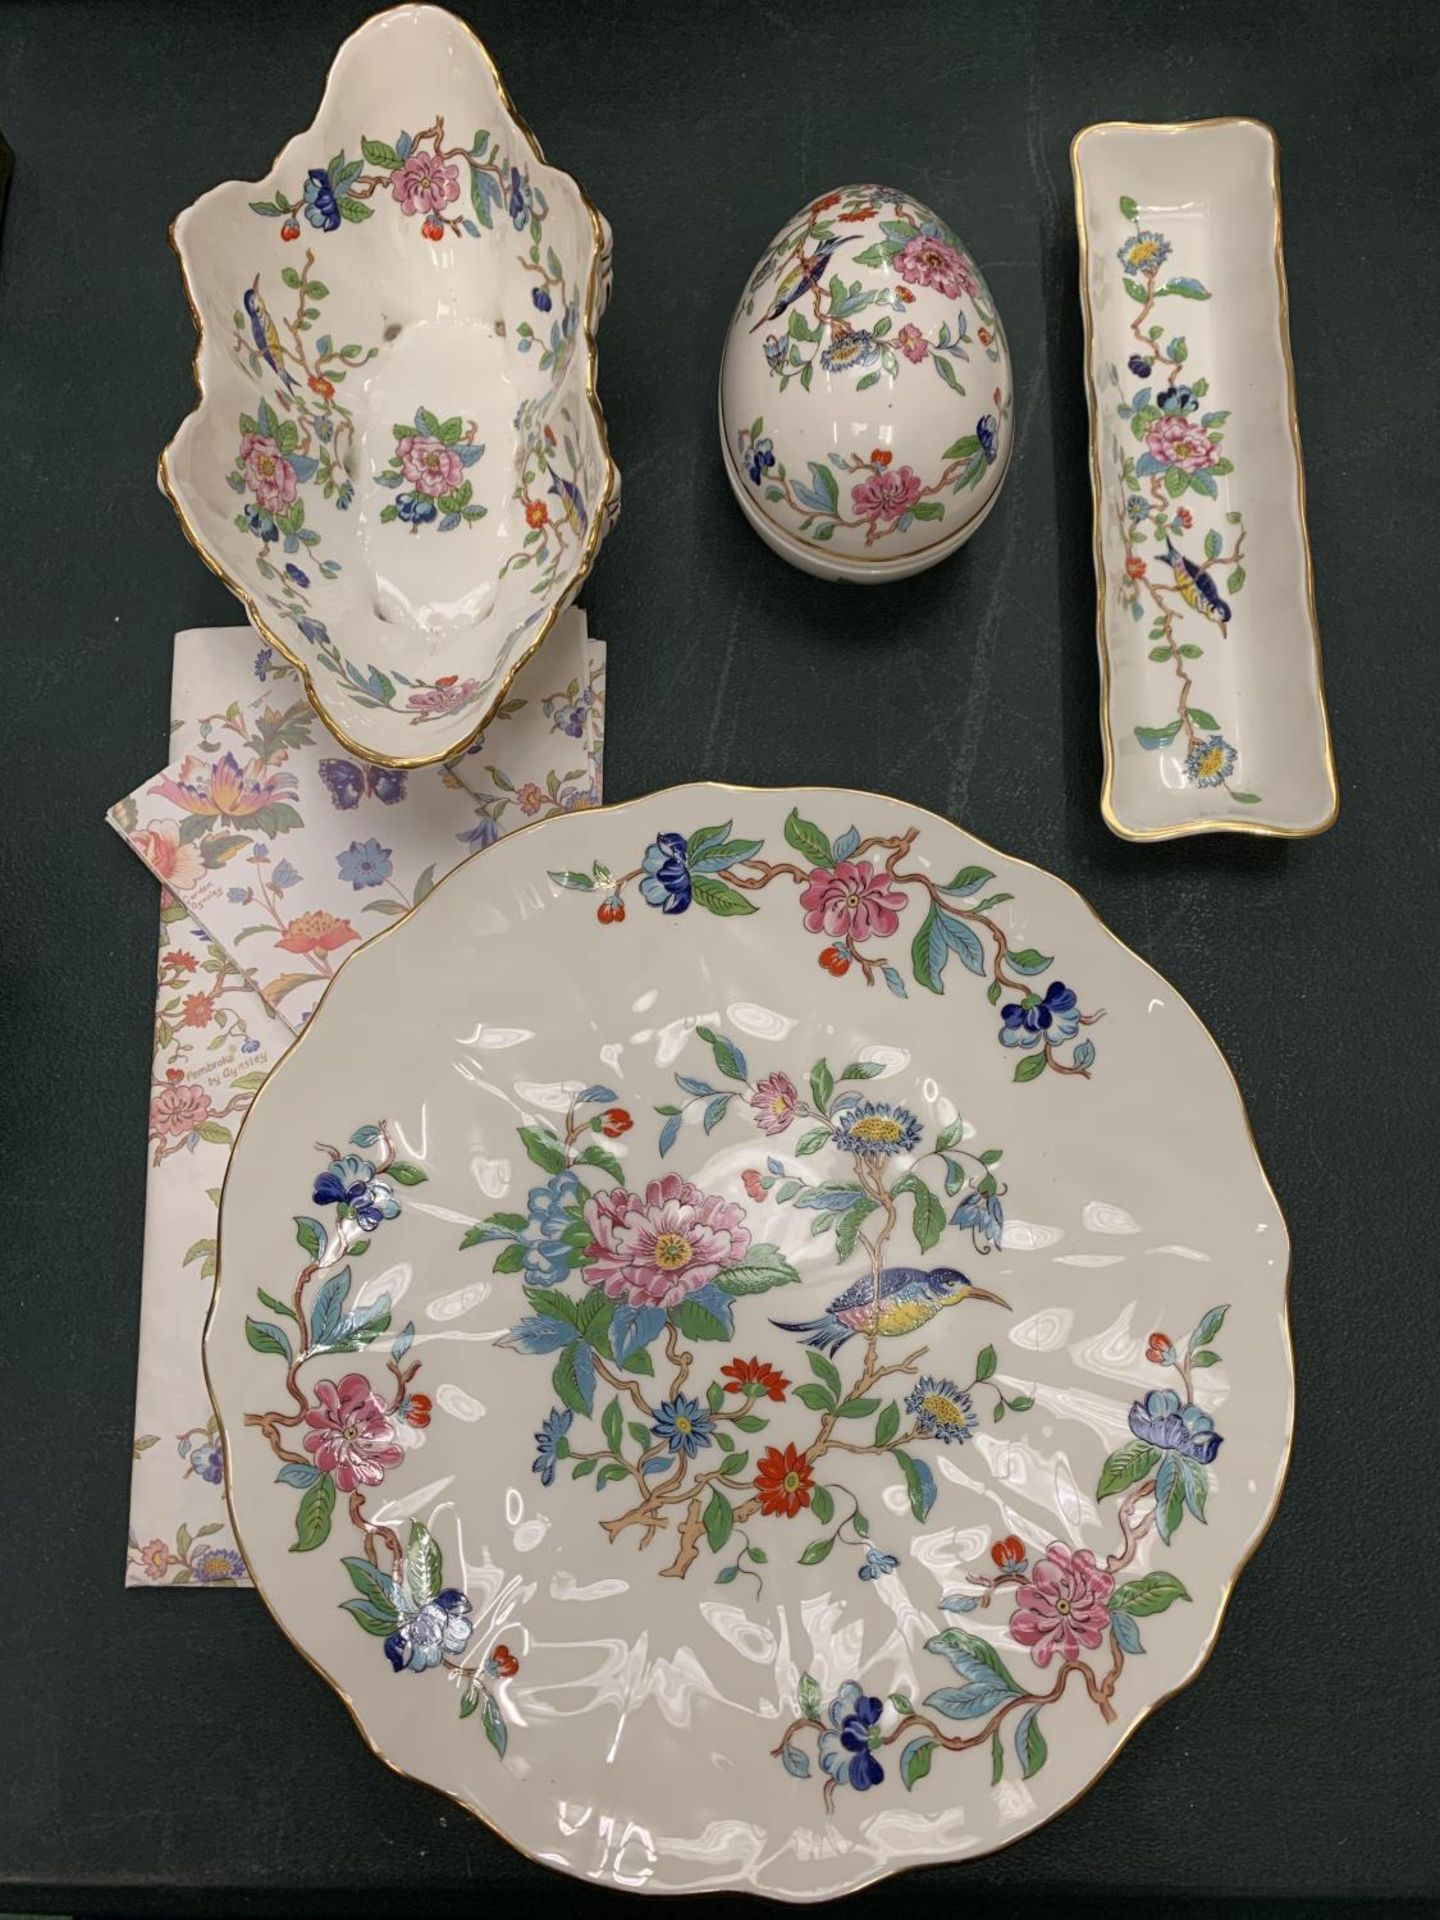 FOUR EXAMPLES OF AYNSLEY 'PEMBROKE' A REPRODUCTION OF AN EIGHTEENTH CENTURY DESIGN